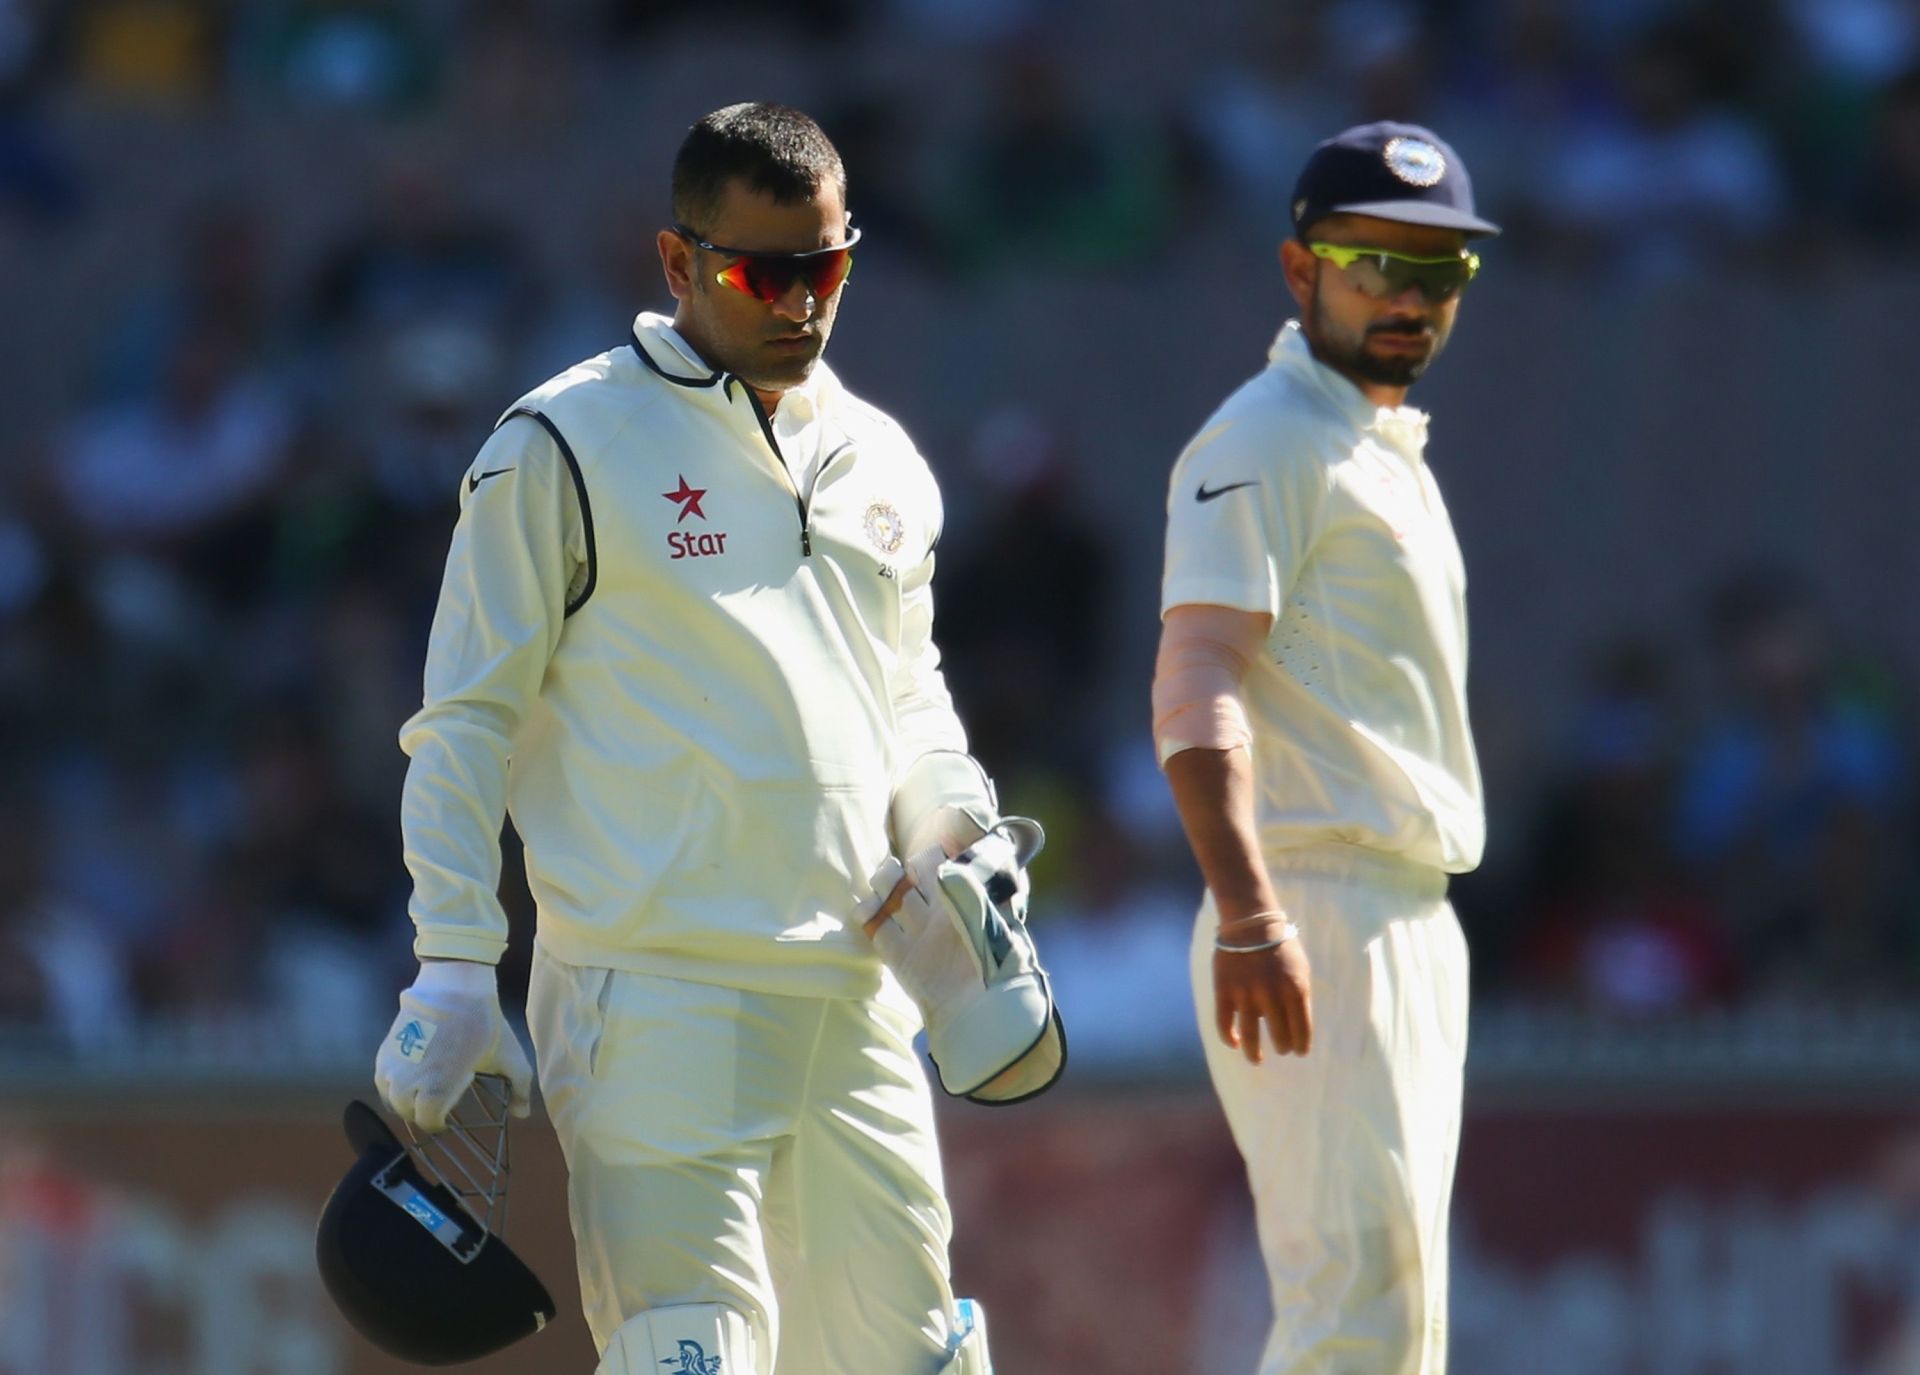 MS Dhoni quit the longest format after the 2014 Boxing Day Test against Australia